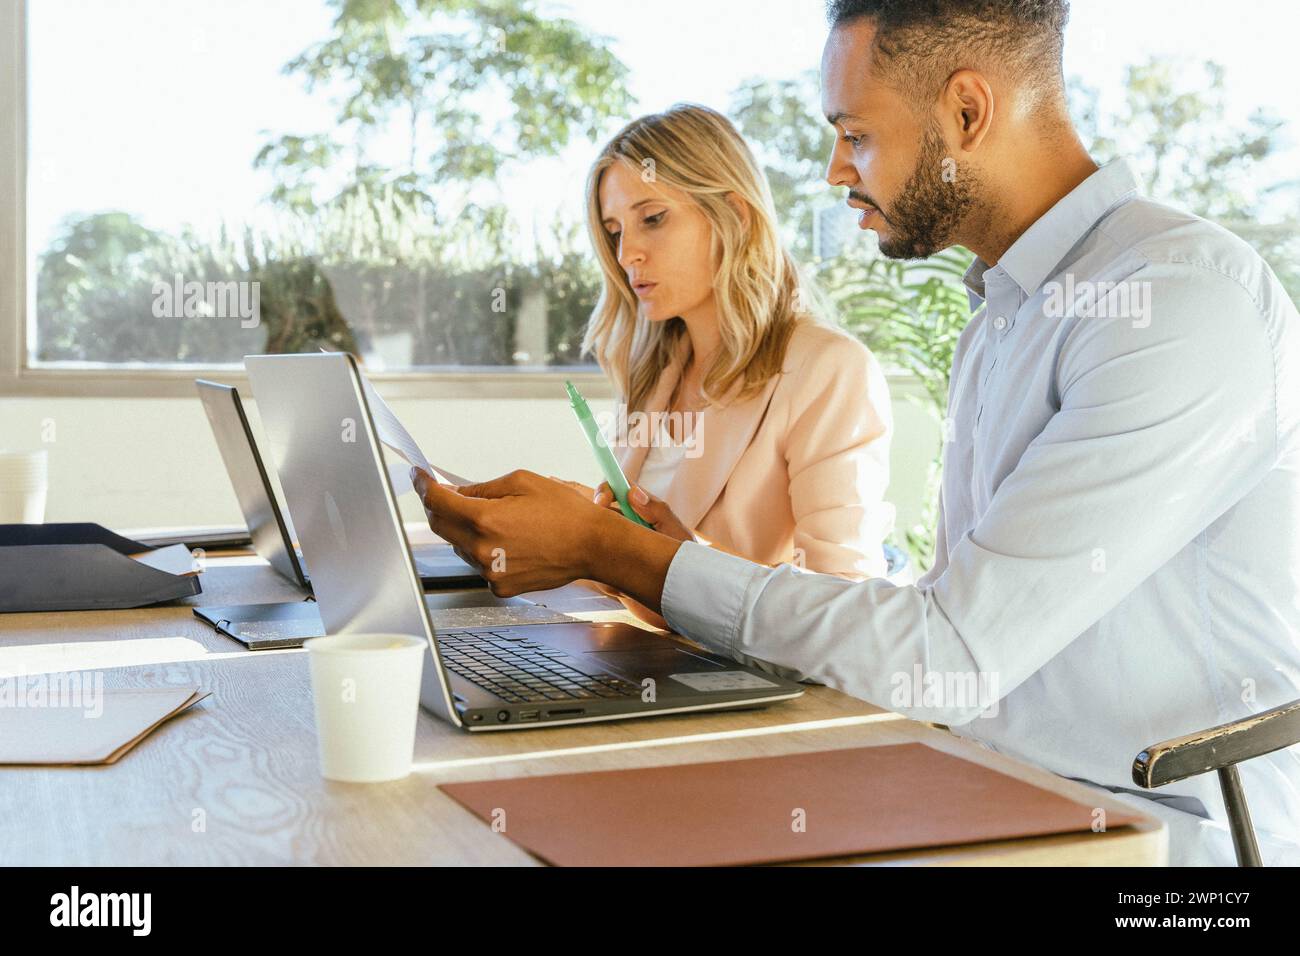 Business colleagues analyzing paperwork while working together in the office. Business concept. Stock Photo